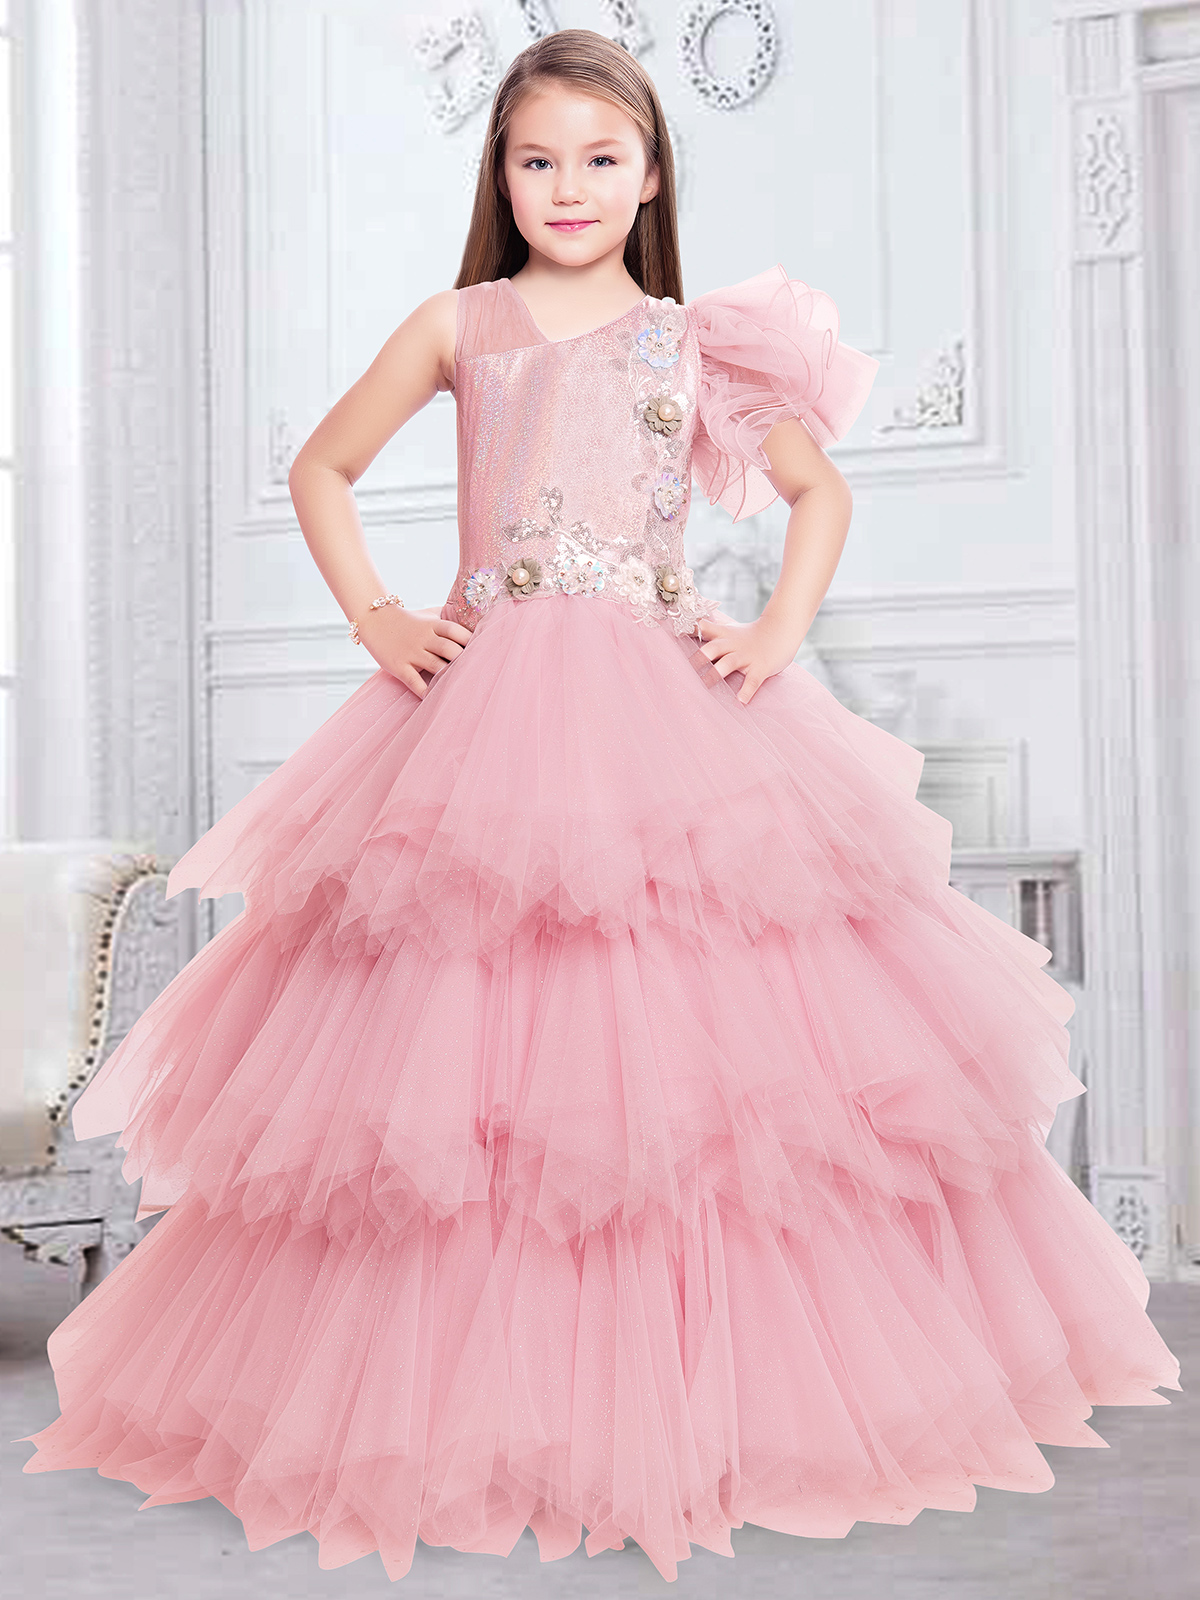 Modest Multi-colored Quinceanera Dress Sweetheart Tulle Beading Ball Gown